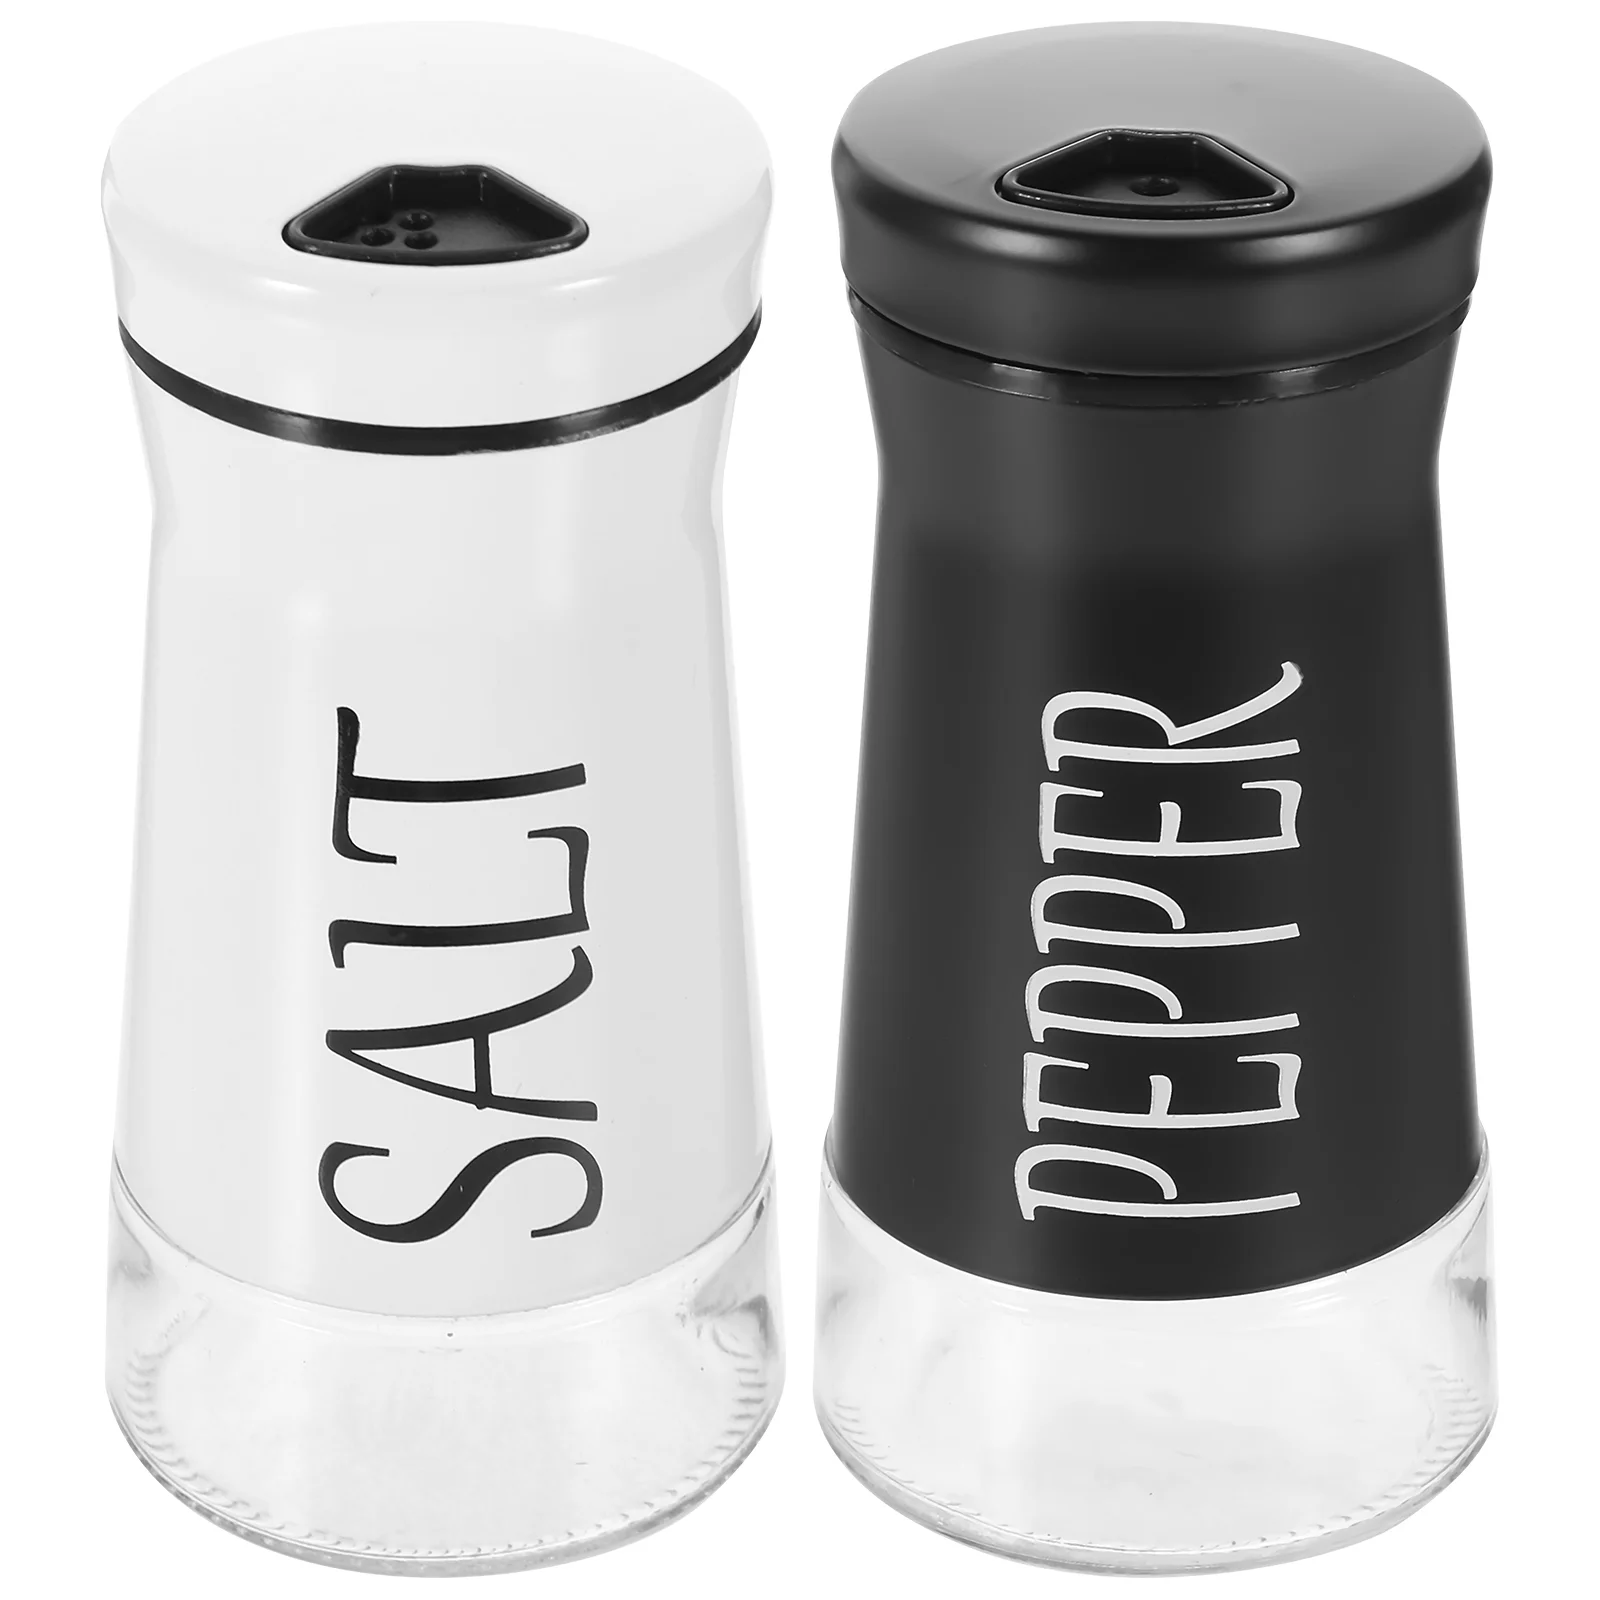 

2 Pcs Kitchen Seasoning Containers Pepper Salt And Shakers Jar Jars Stainless Steel Spice Bottle Condiment